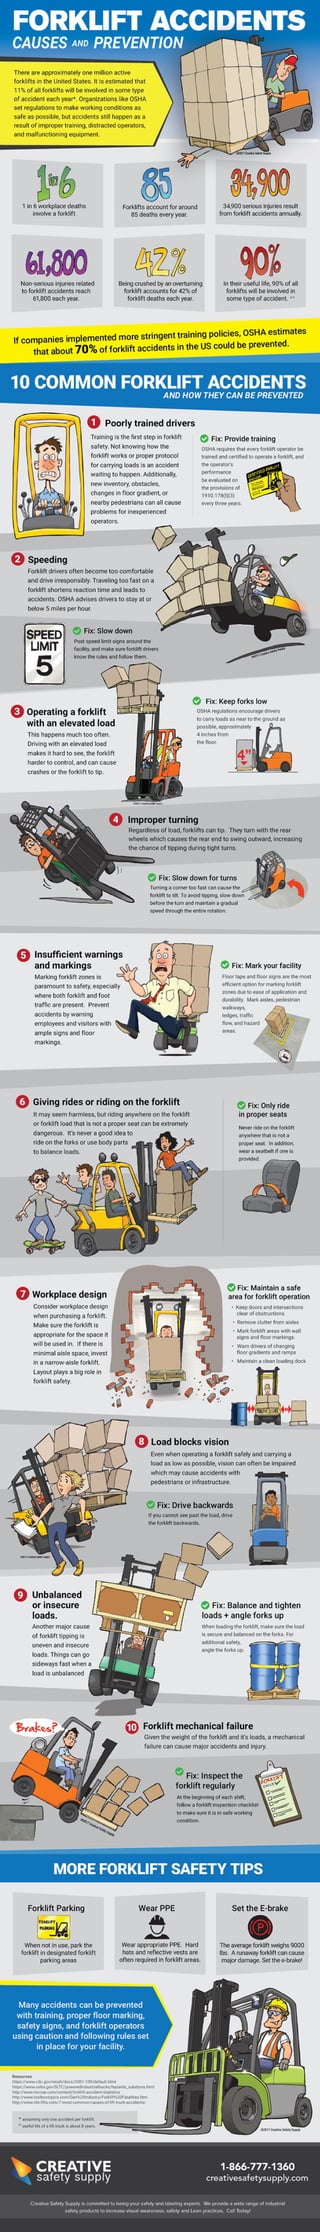 Forklift Safety Through Images